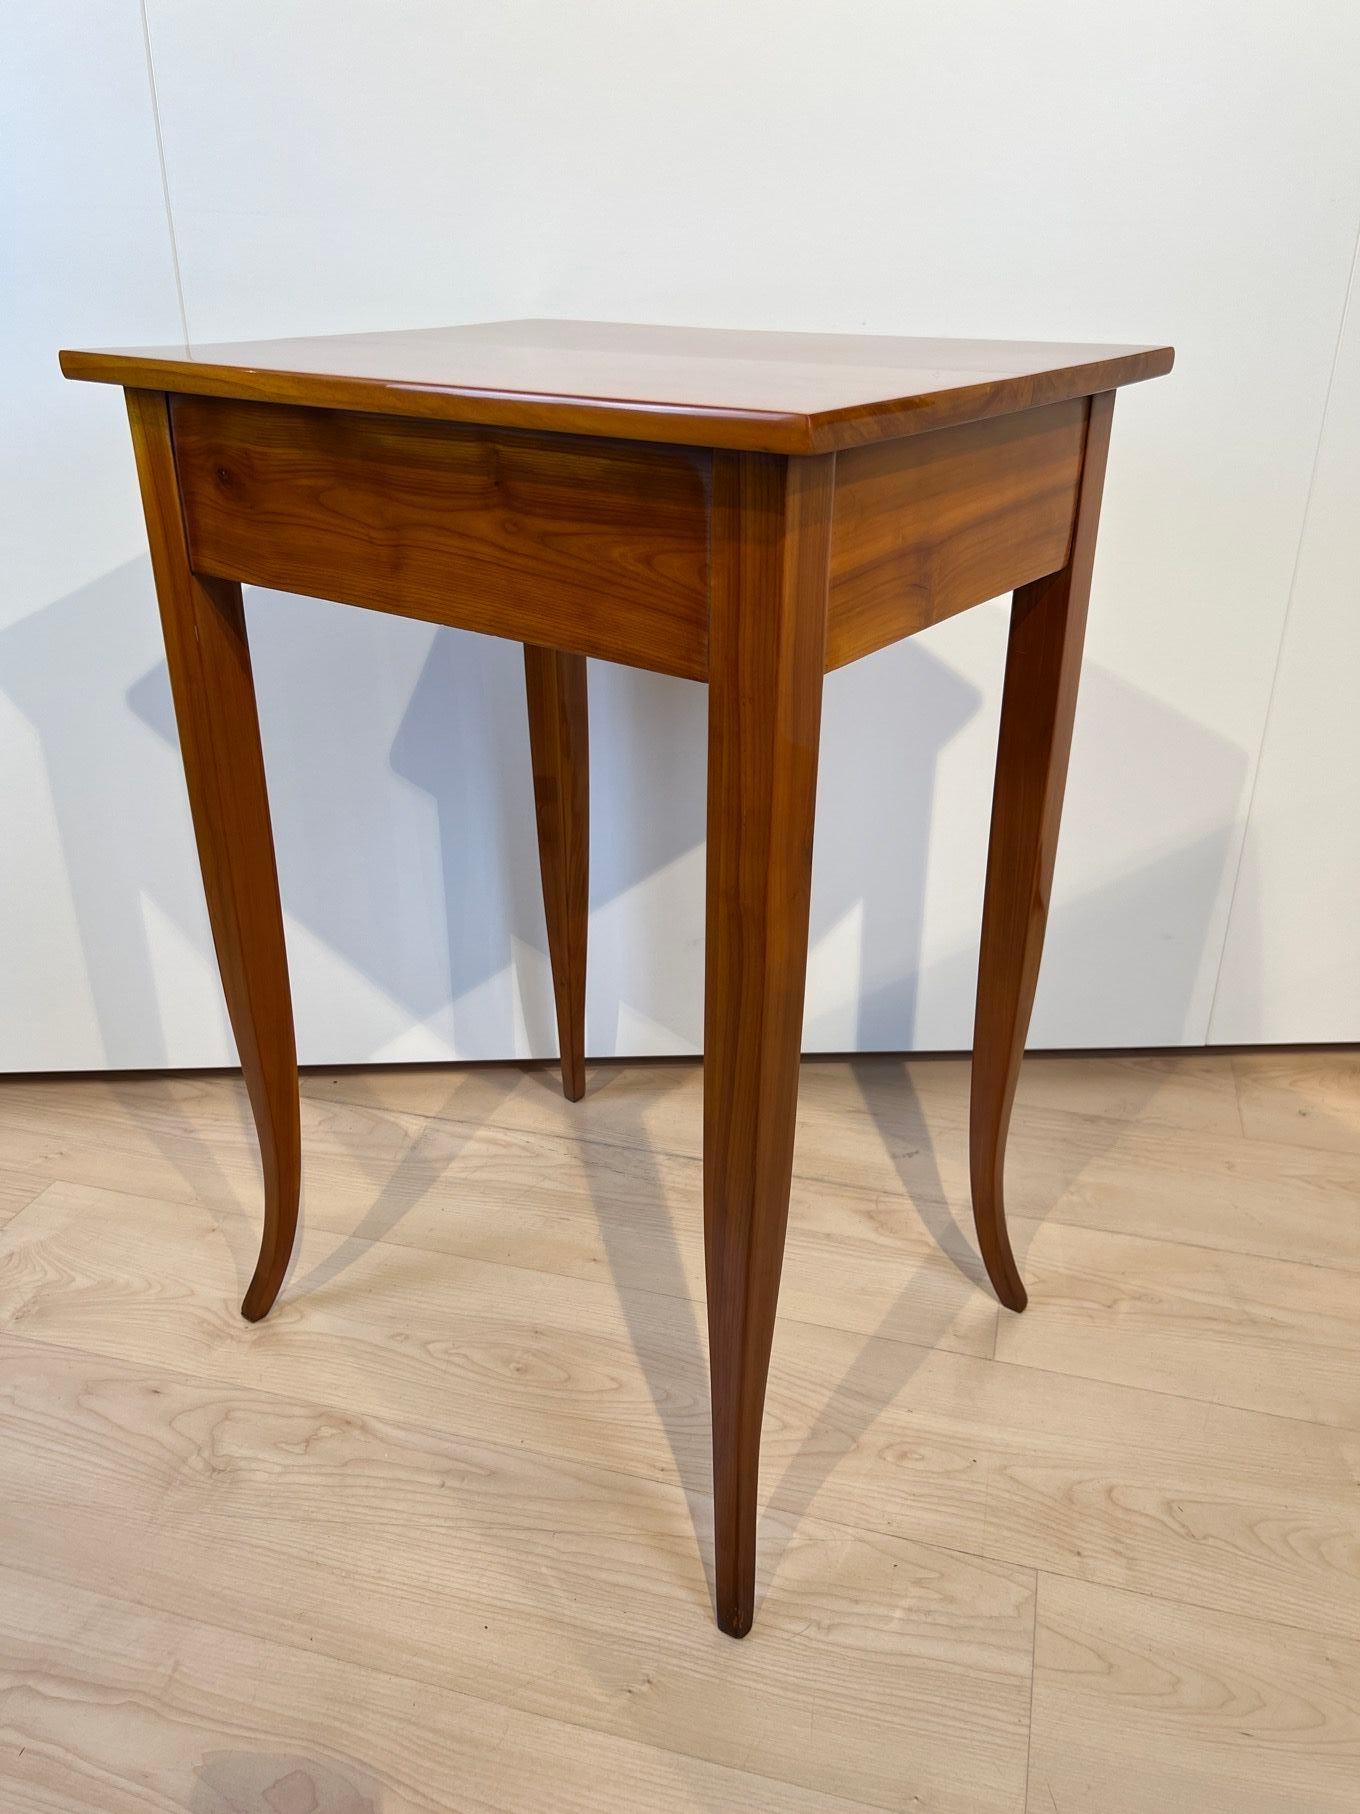 Biedermeier Side Table with Drawer, Cherry Wood, South Germany circa 1825 For Sale 8